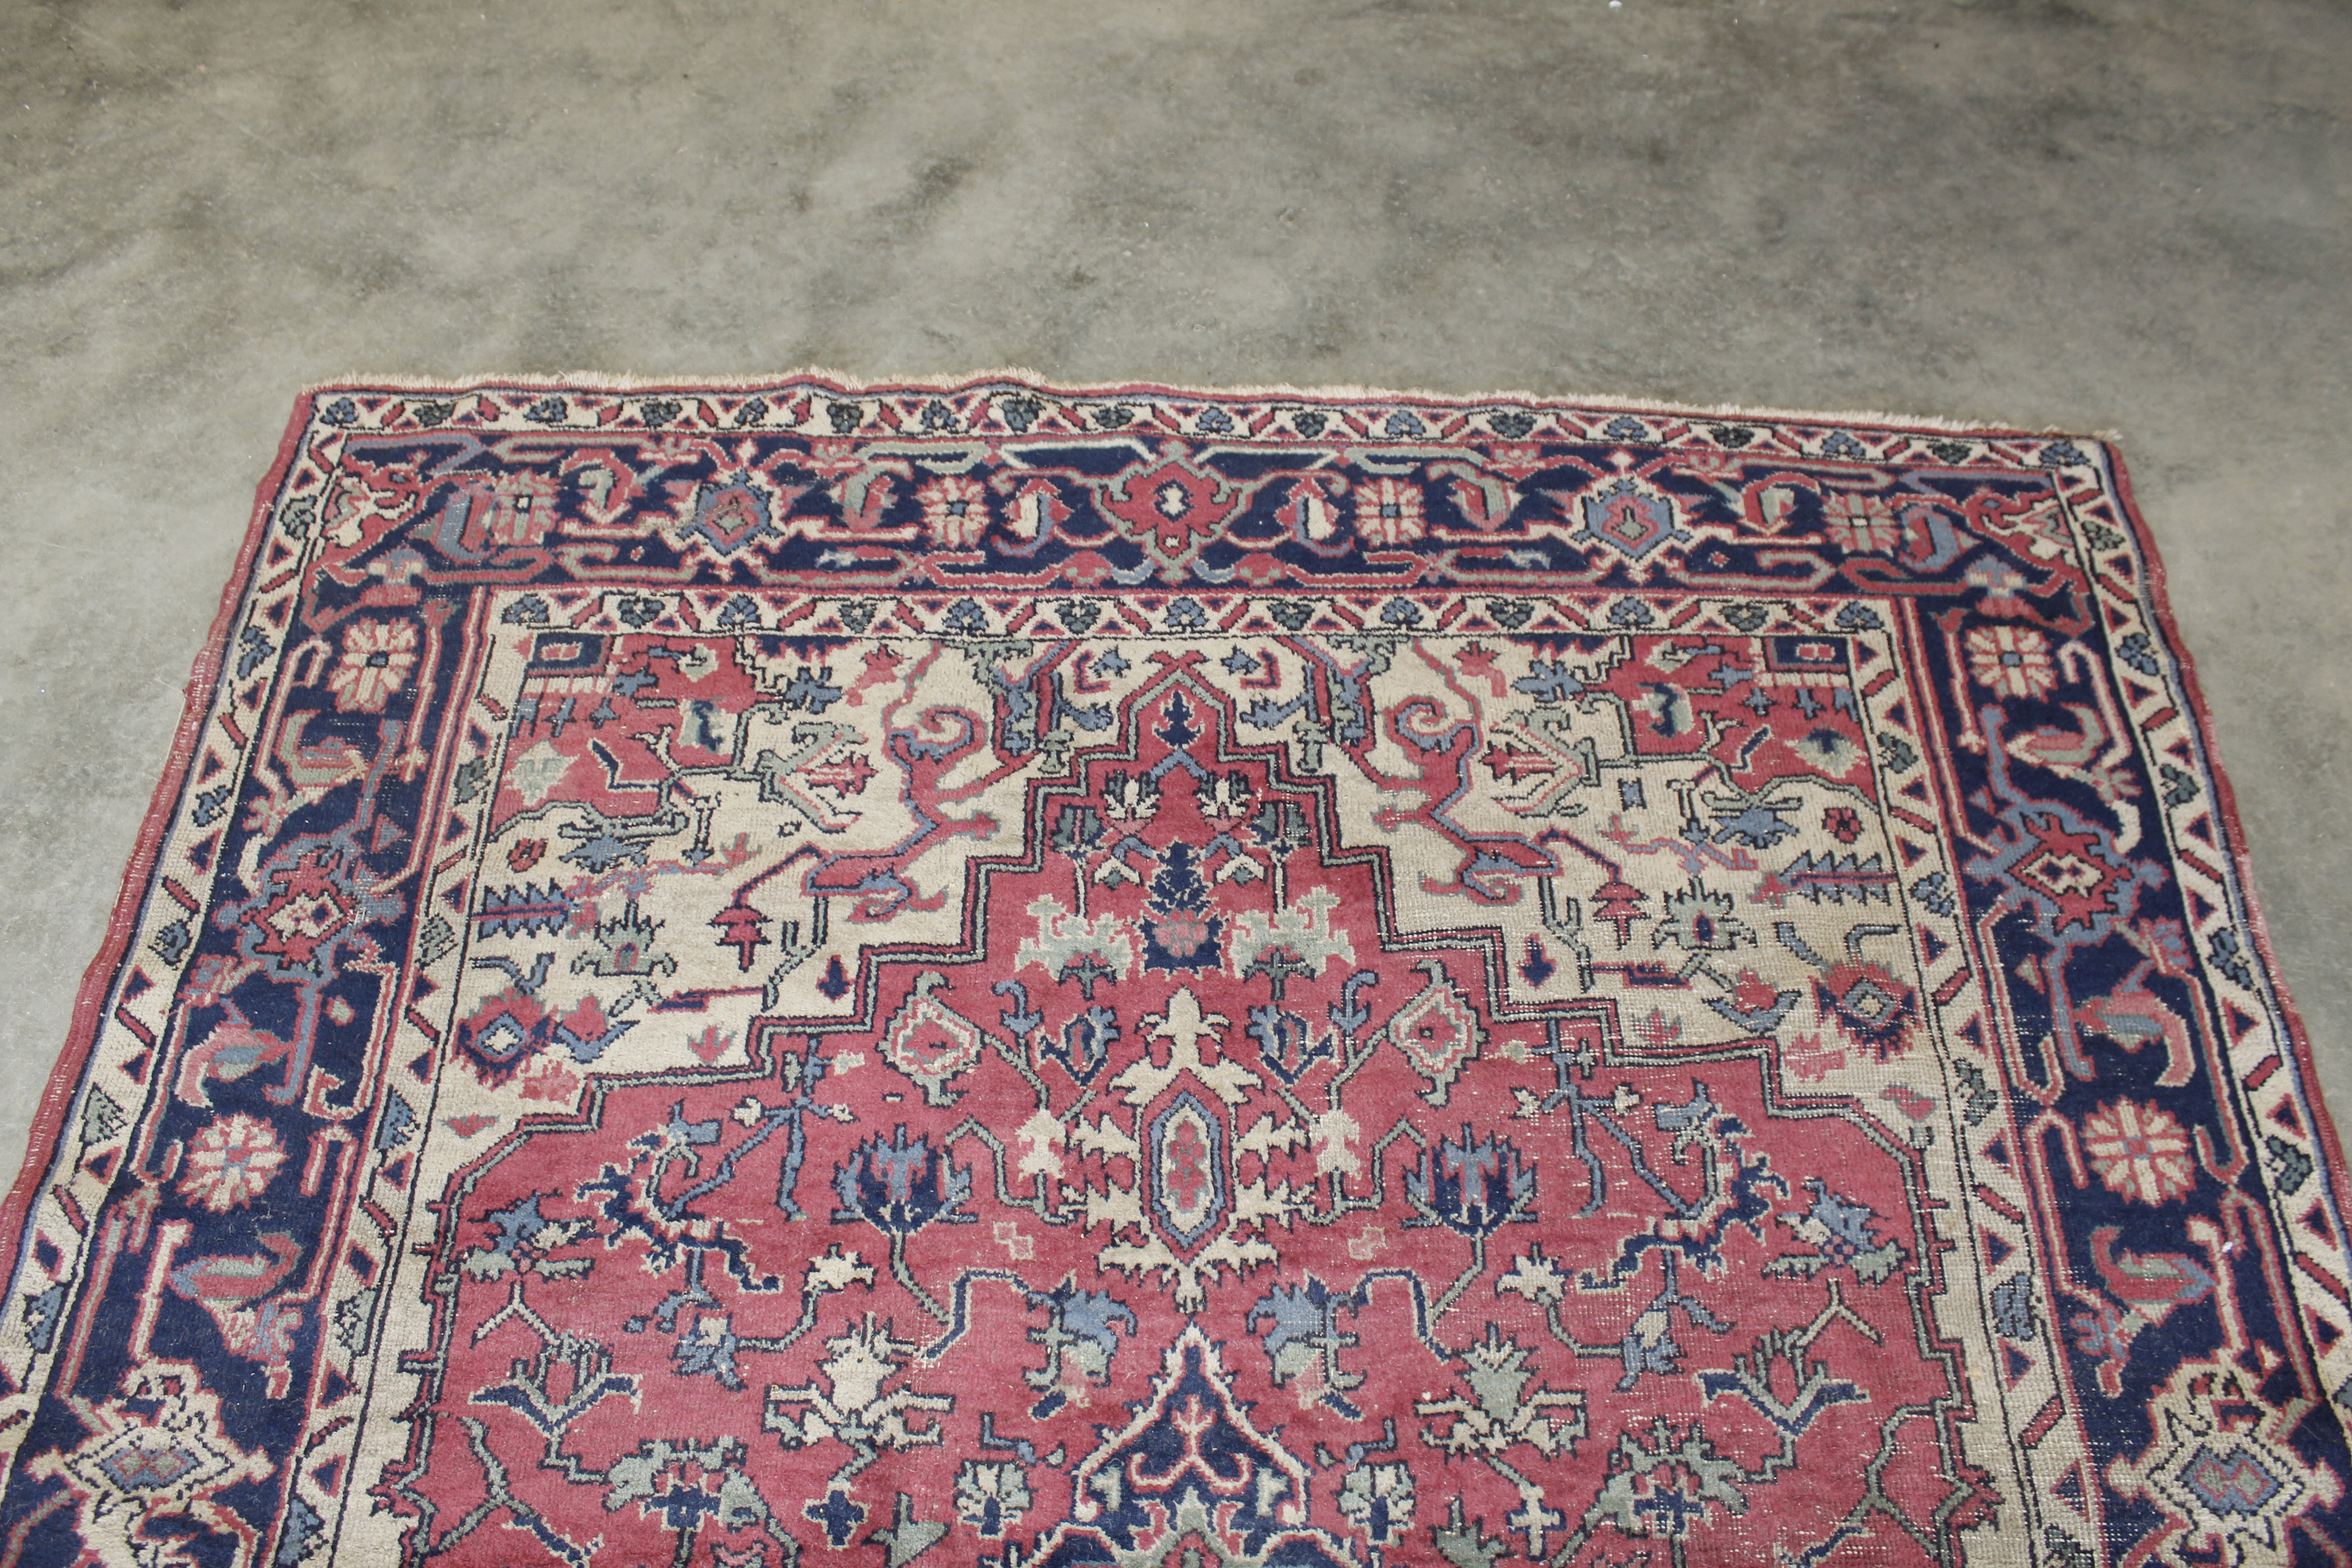 An approx. 9" x 6" blue and red patterned rug - Image 3 of 5